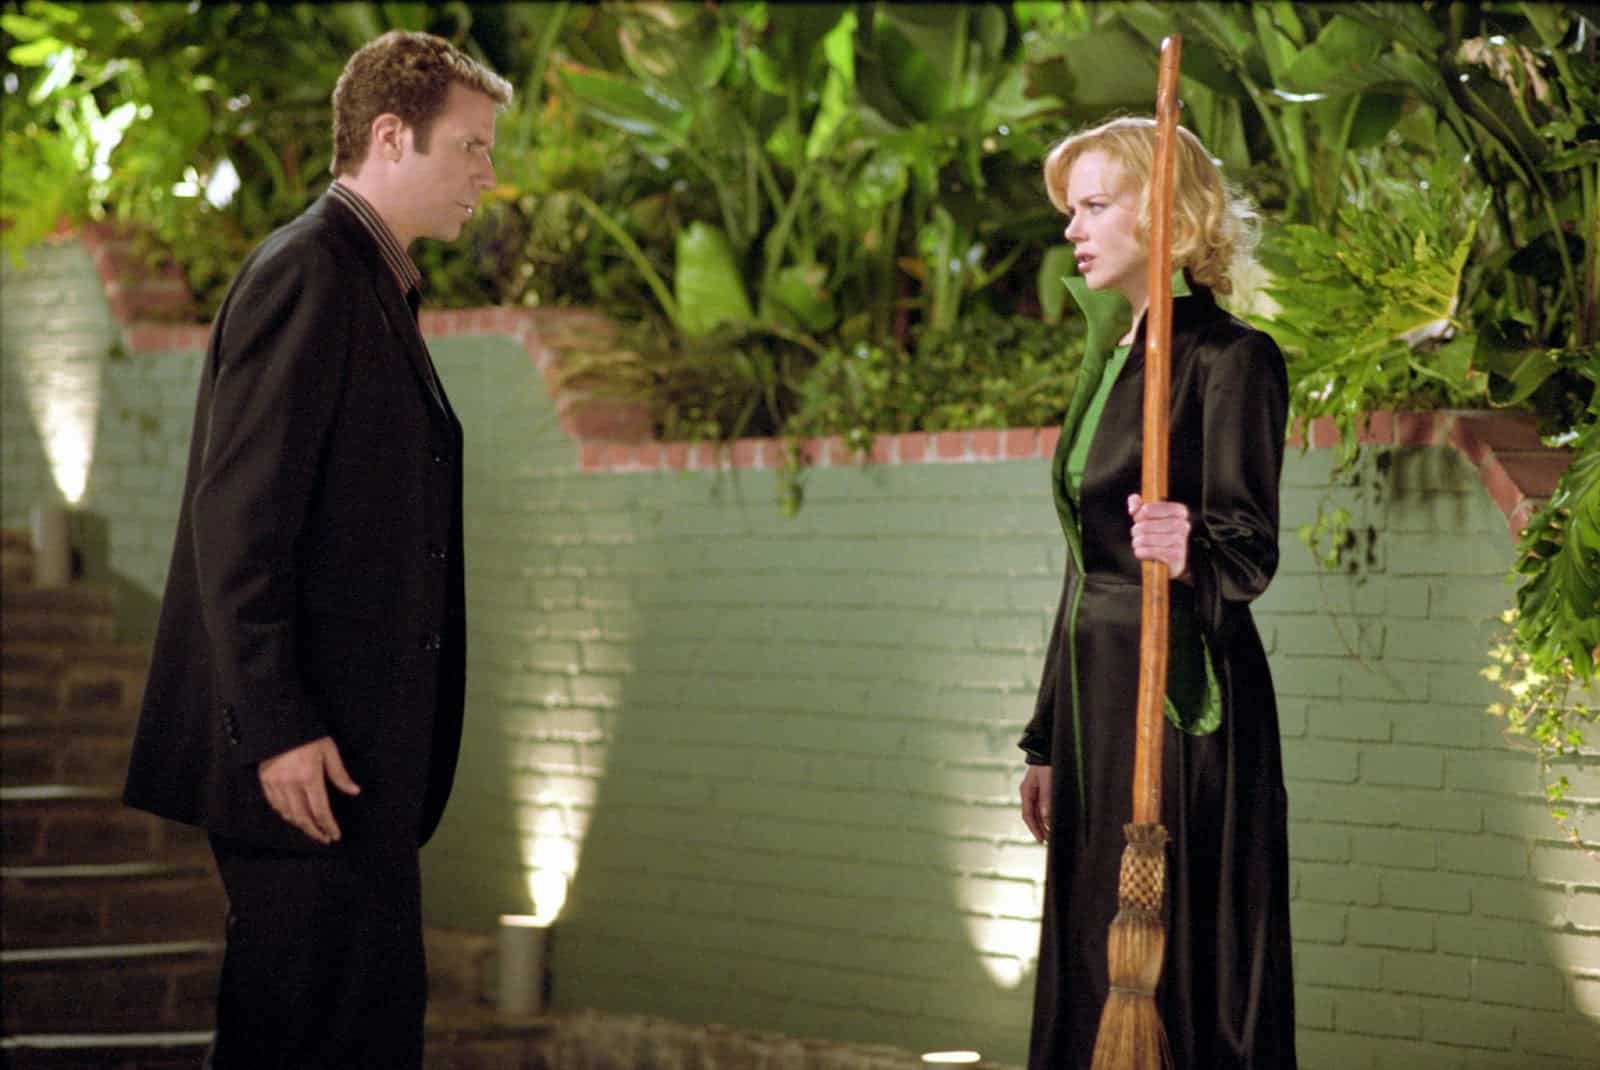 A man argues with a woman holding a broomstick in this image from Columbia Pictures.